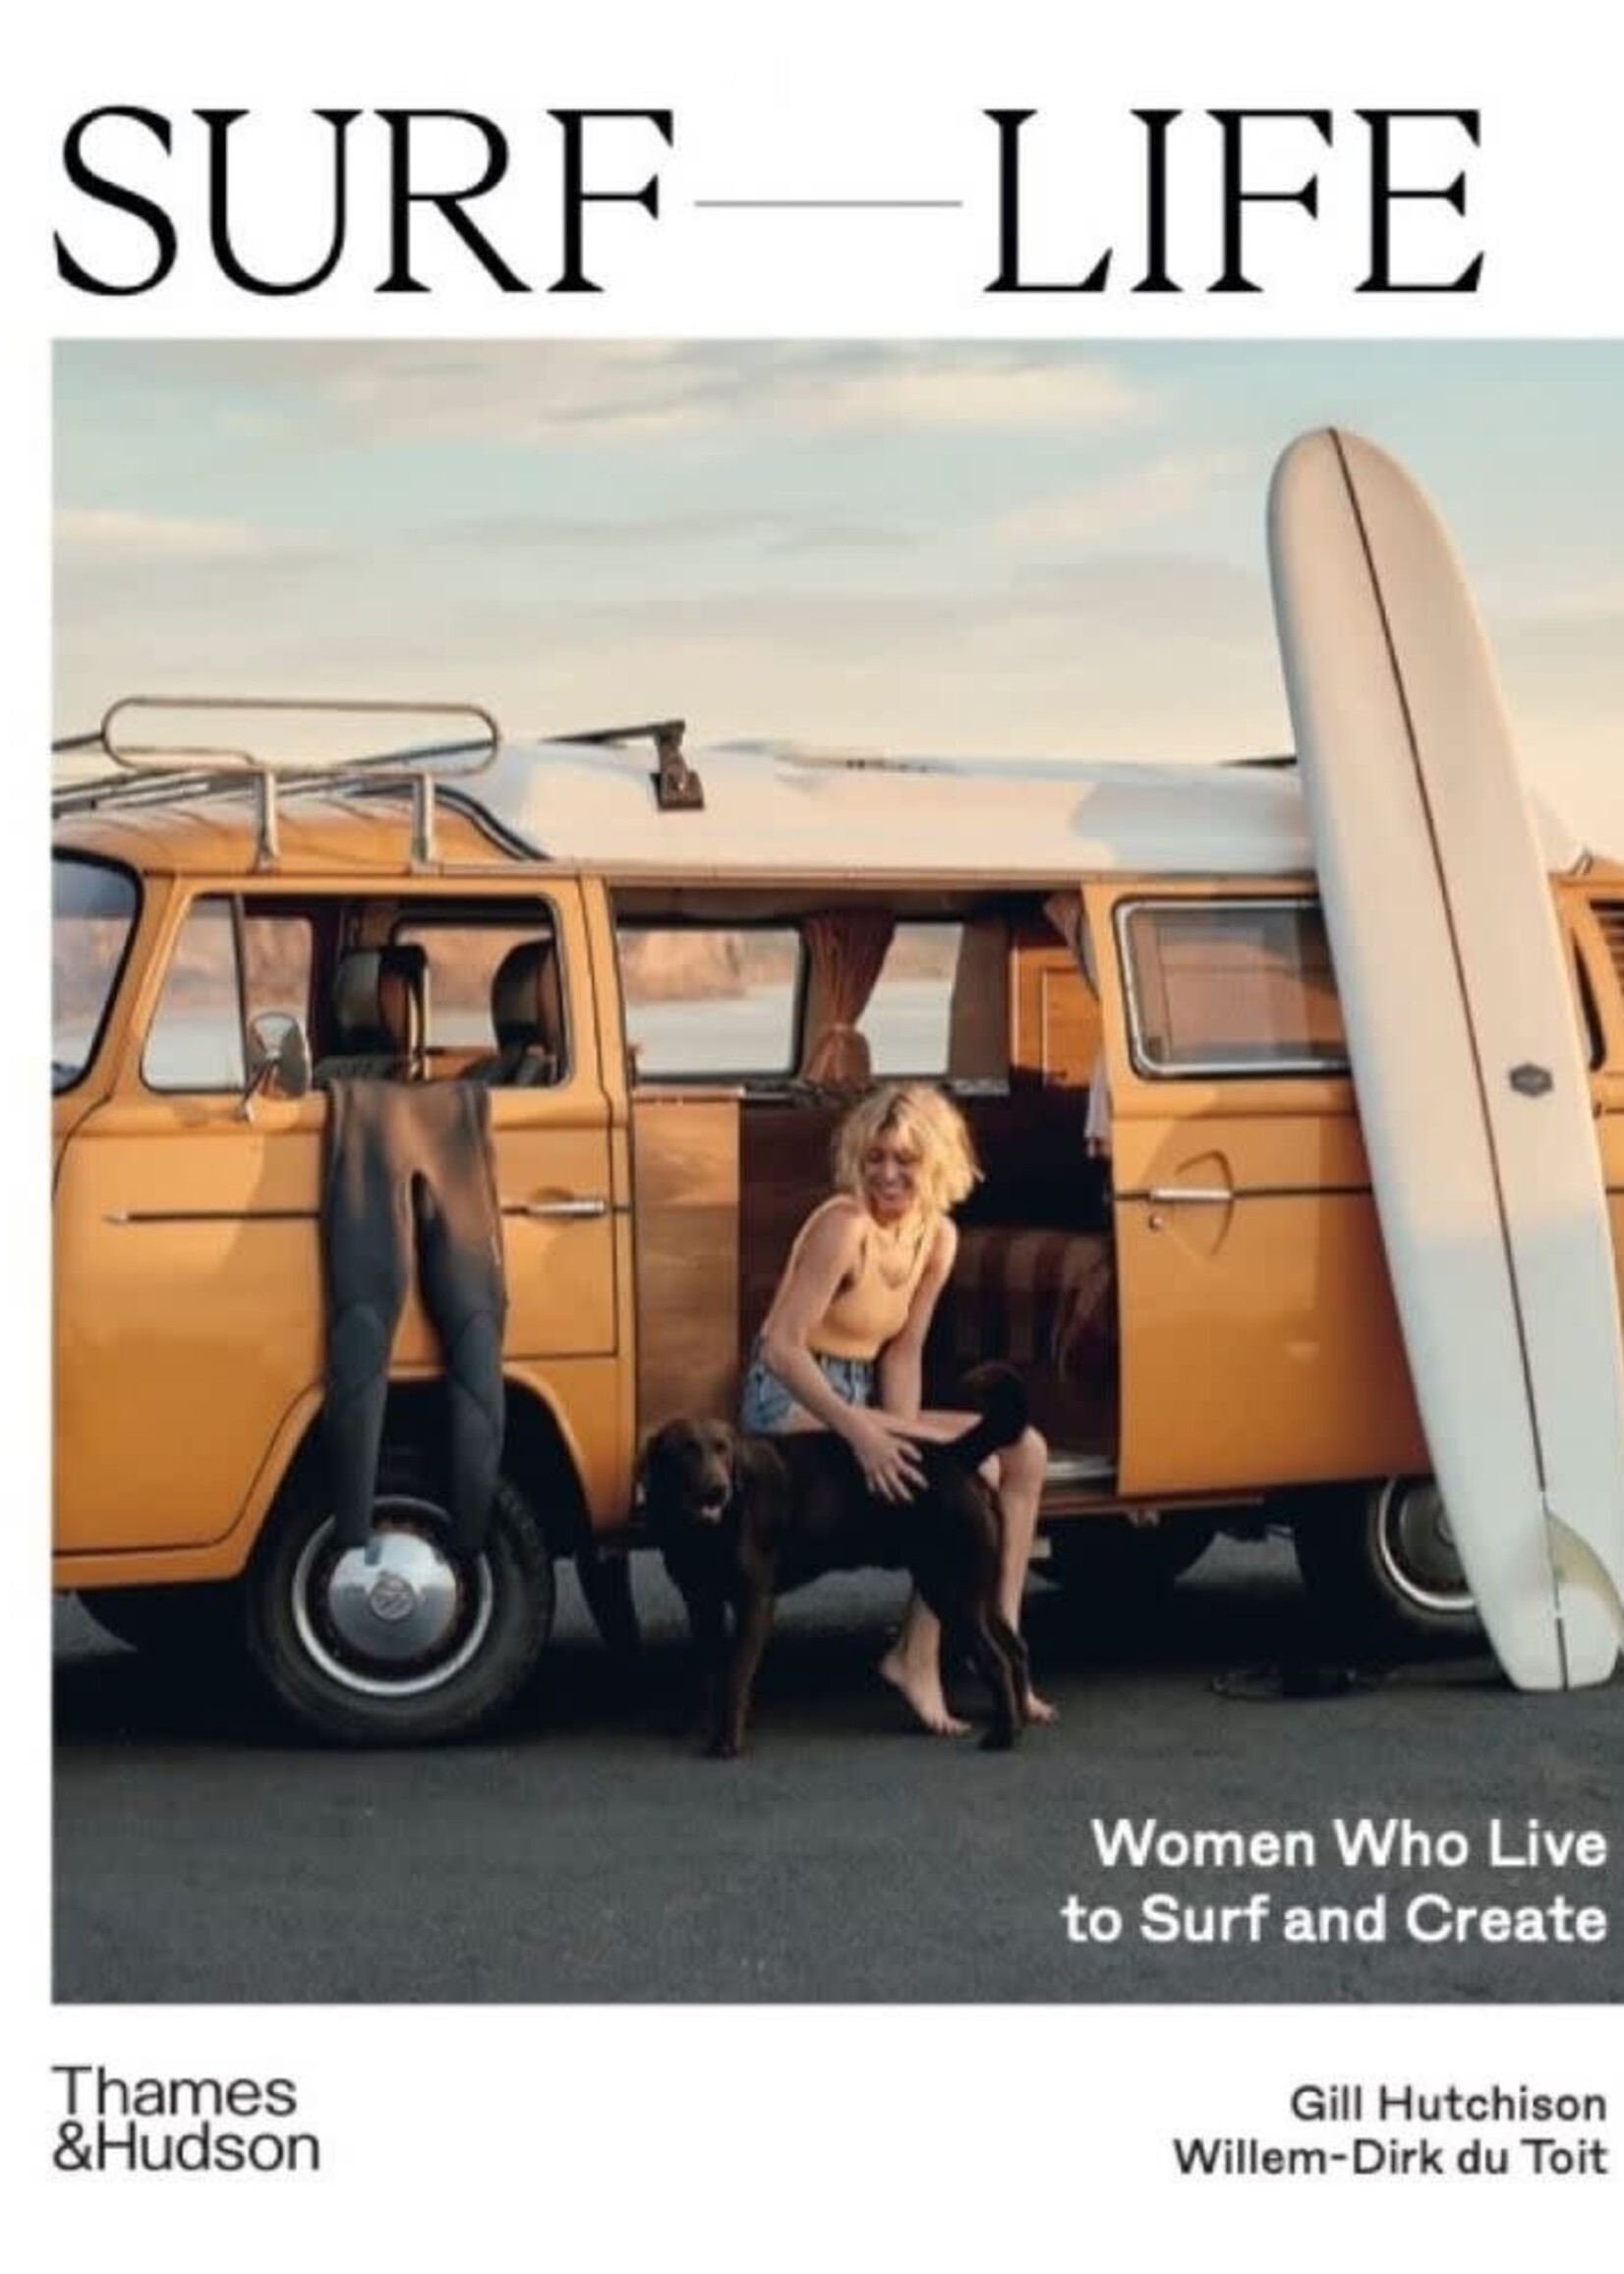 Surf Life - Women Who Live to Surf and Create